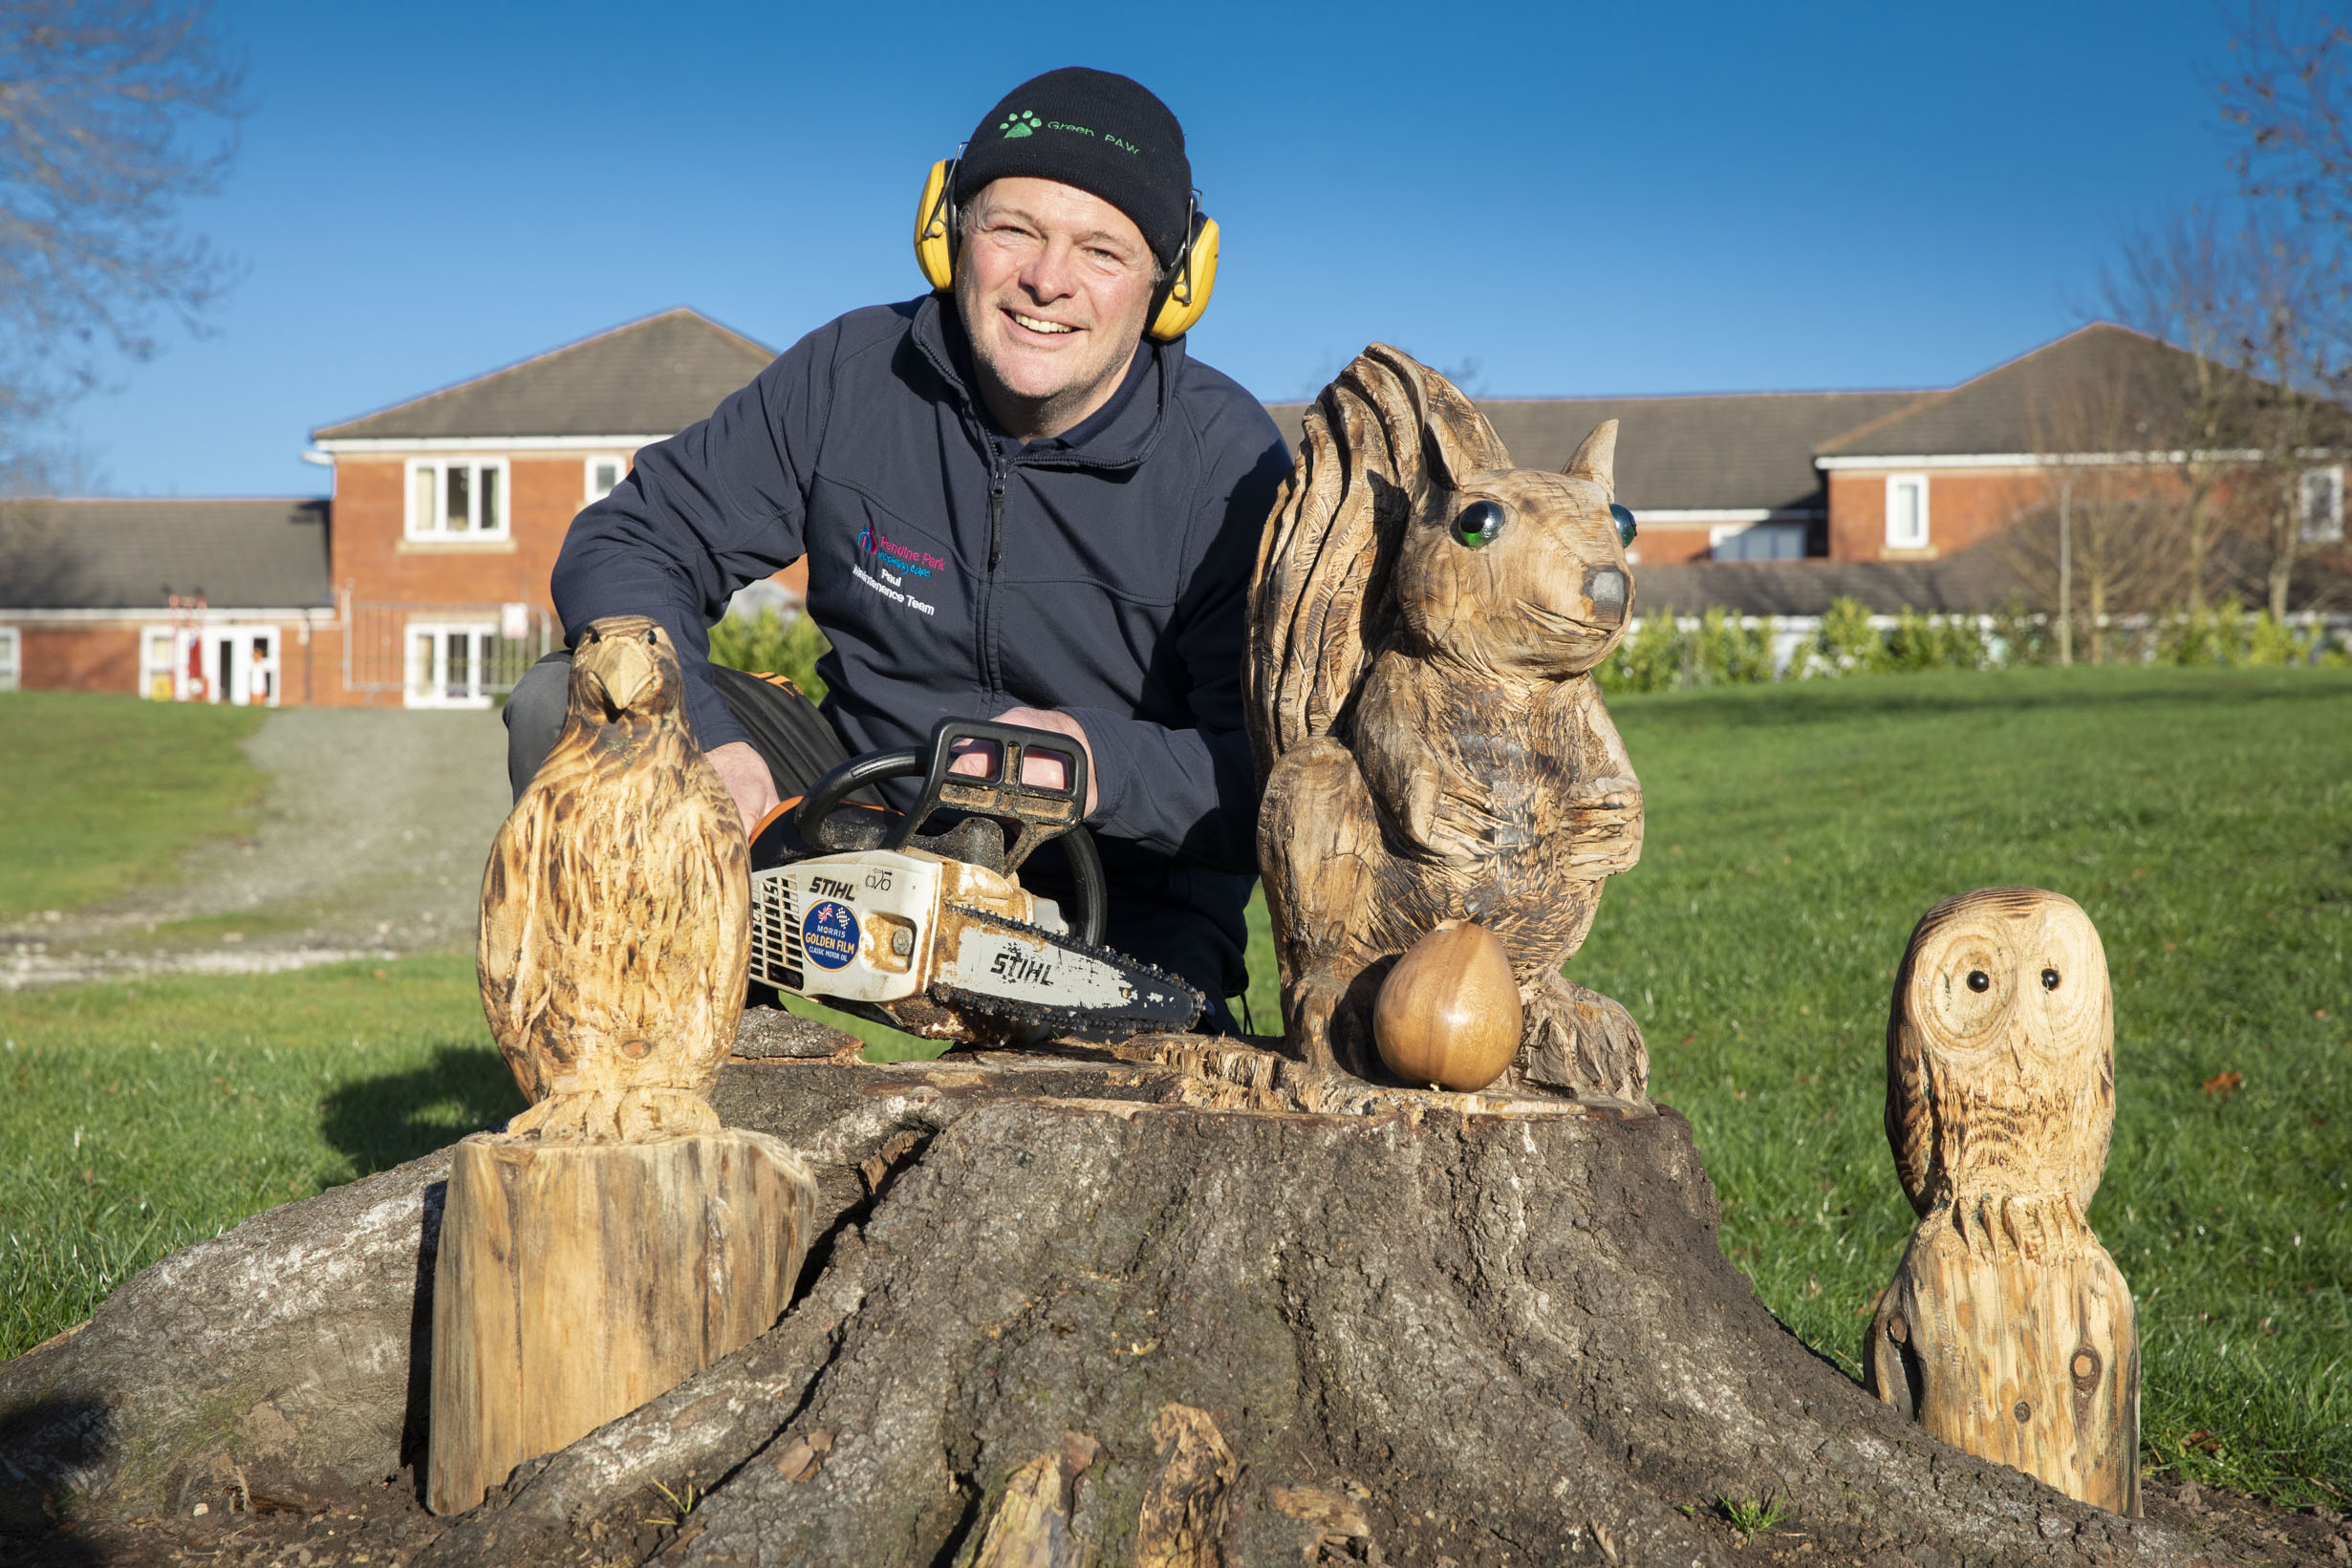 Chainsaw sculptor creates a magnificent menagerie